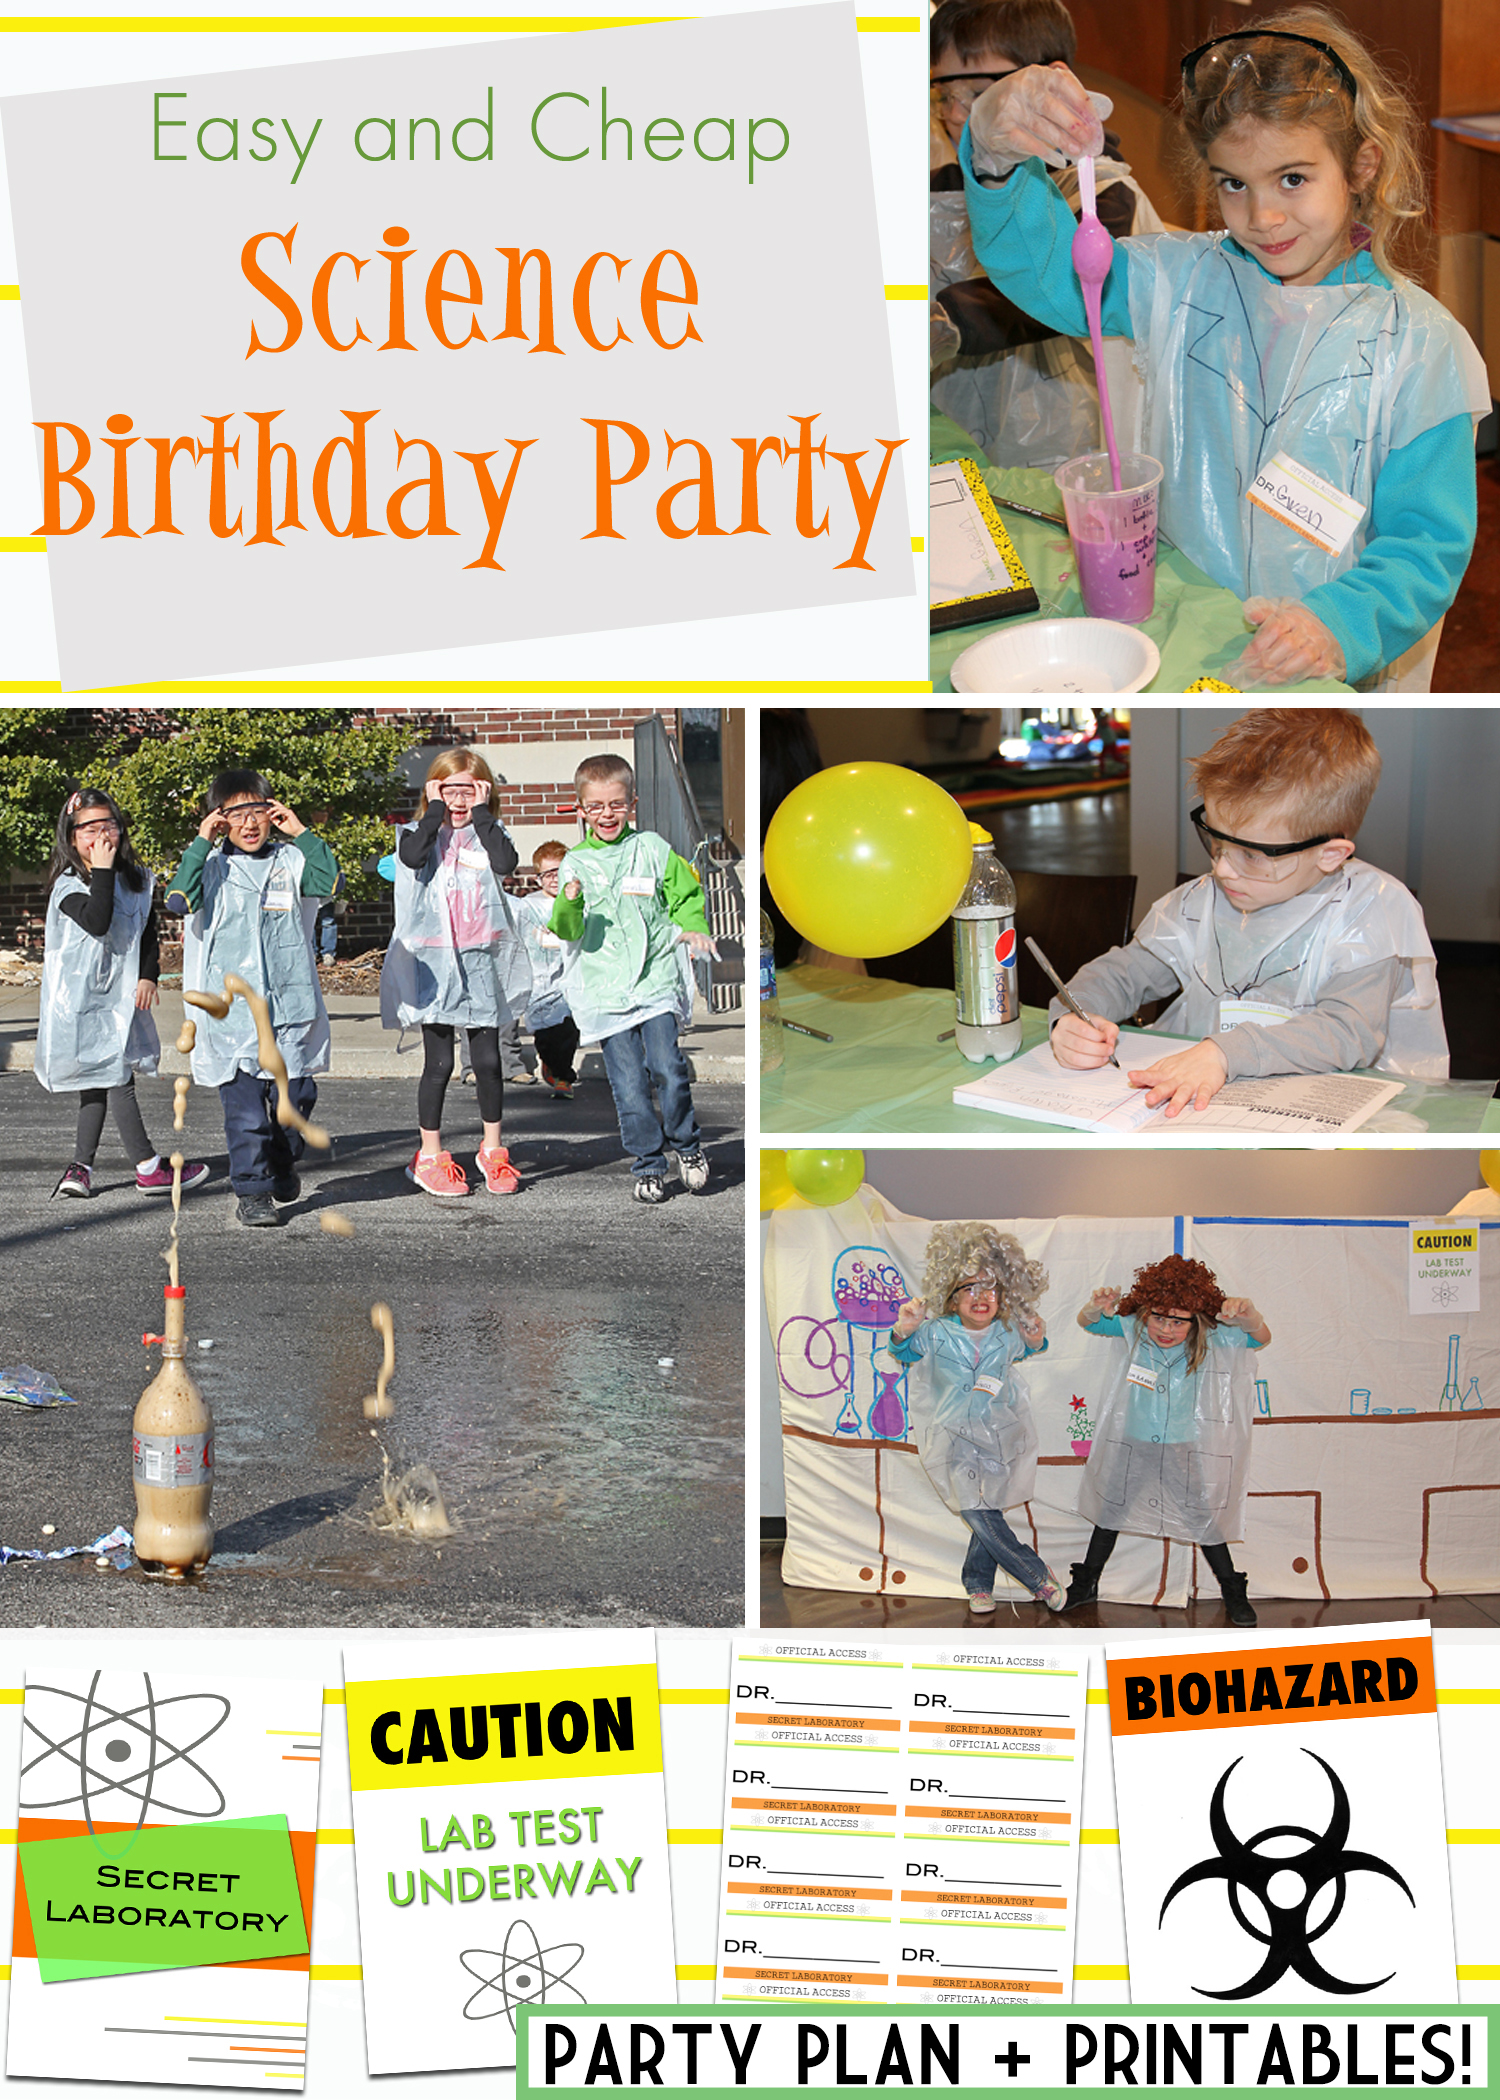 Children's Books Archives - Party Themes & Ideas, Party Supplies, Party  Decorations & Gifts, Holiday Event Planning